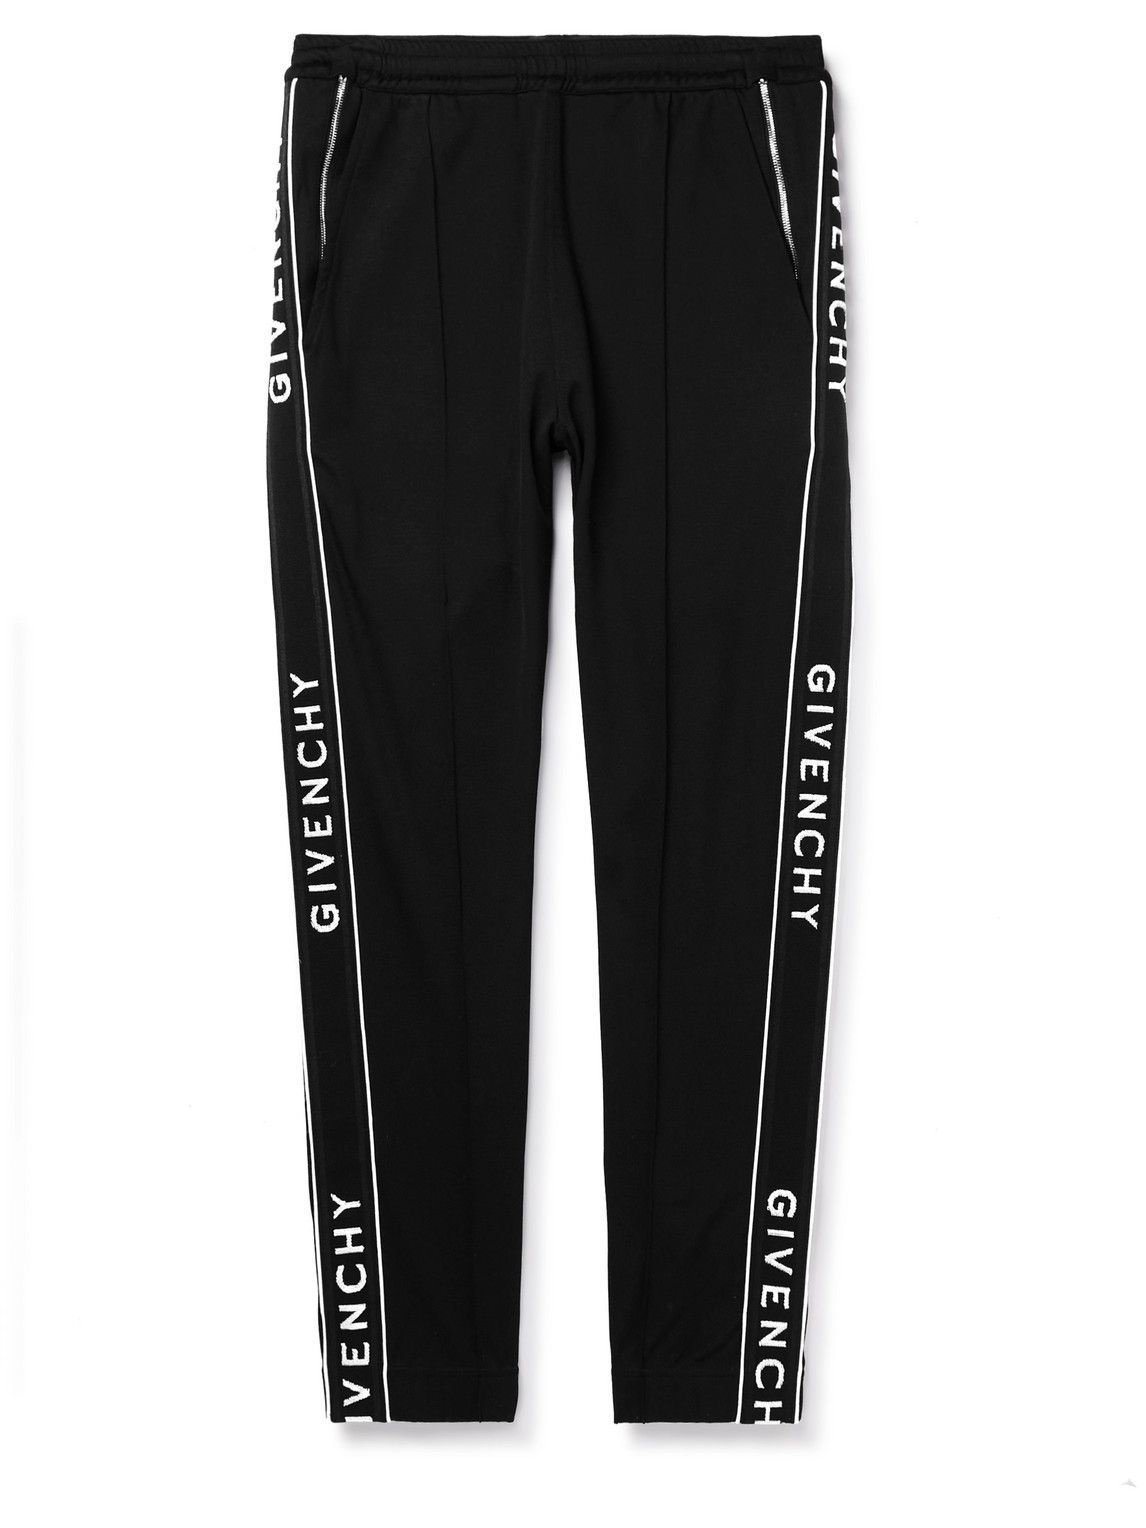 GIVENCHY LOGO TAPERED TRACK PANTS SIZE: M